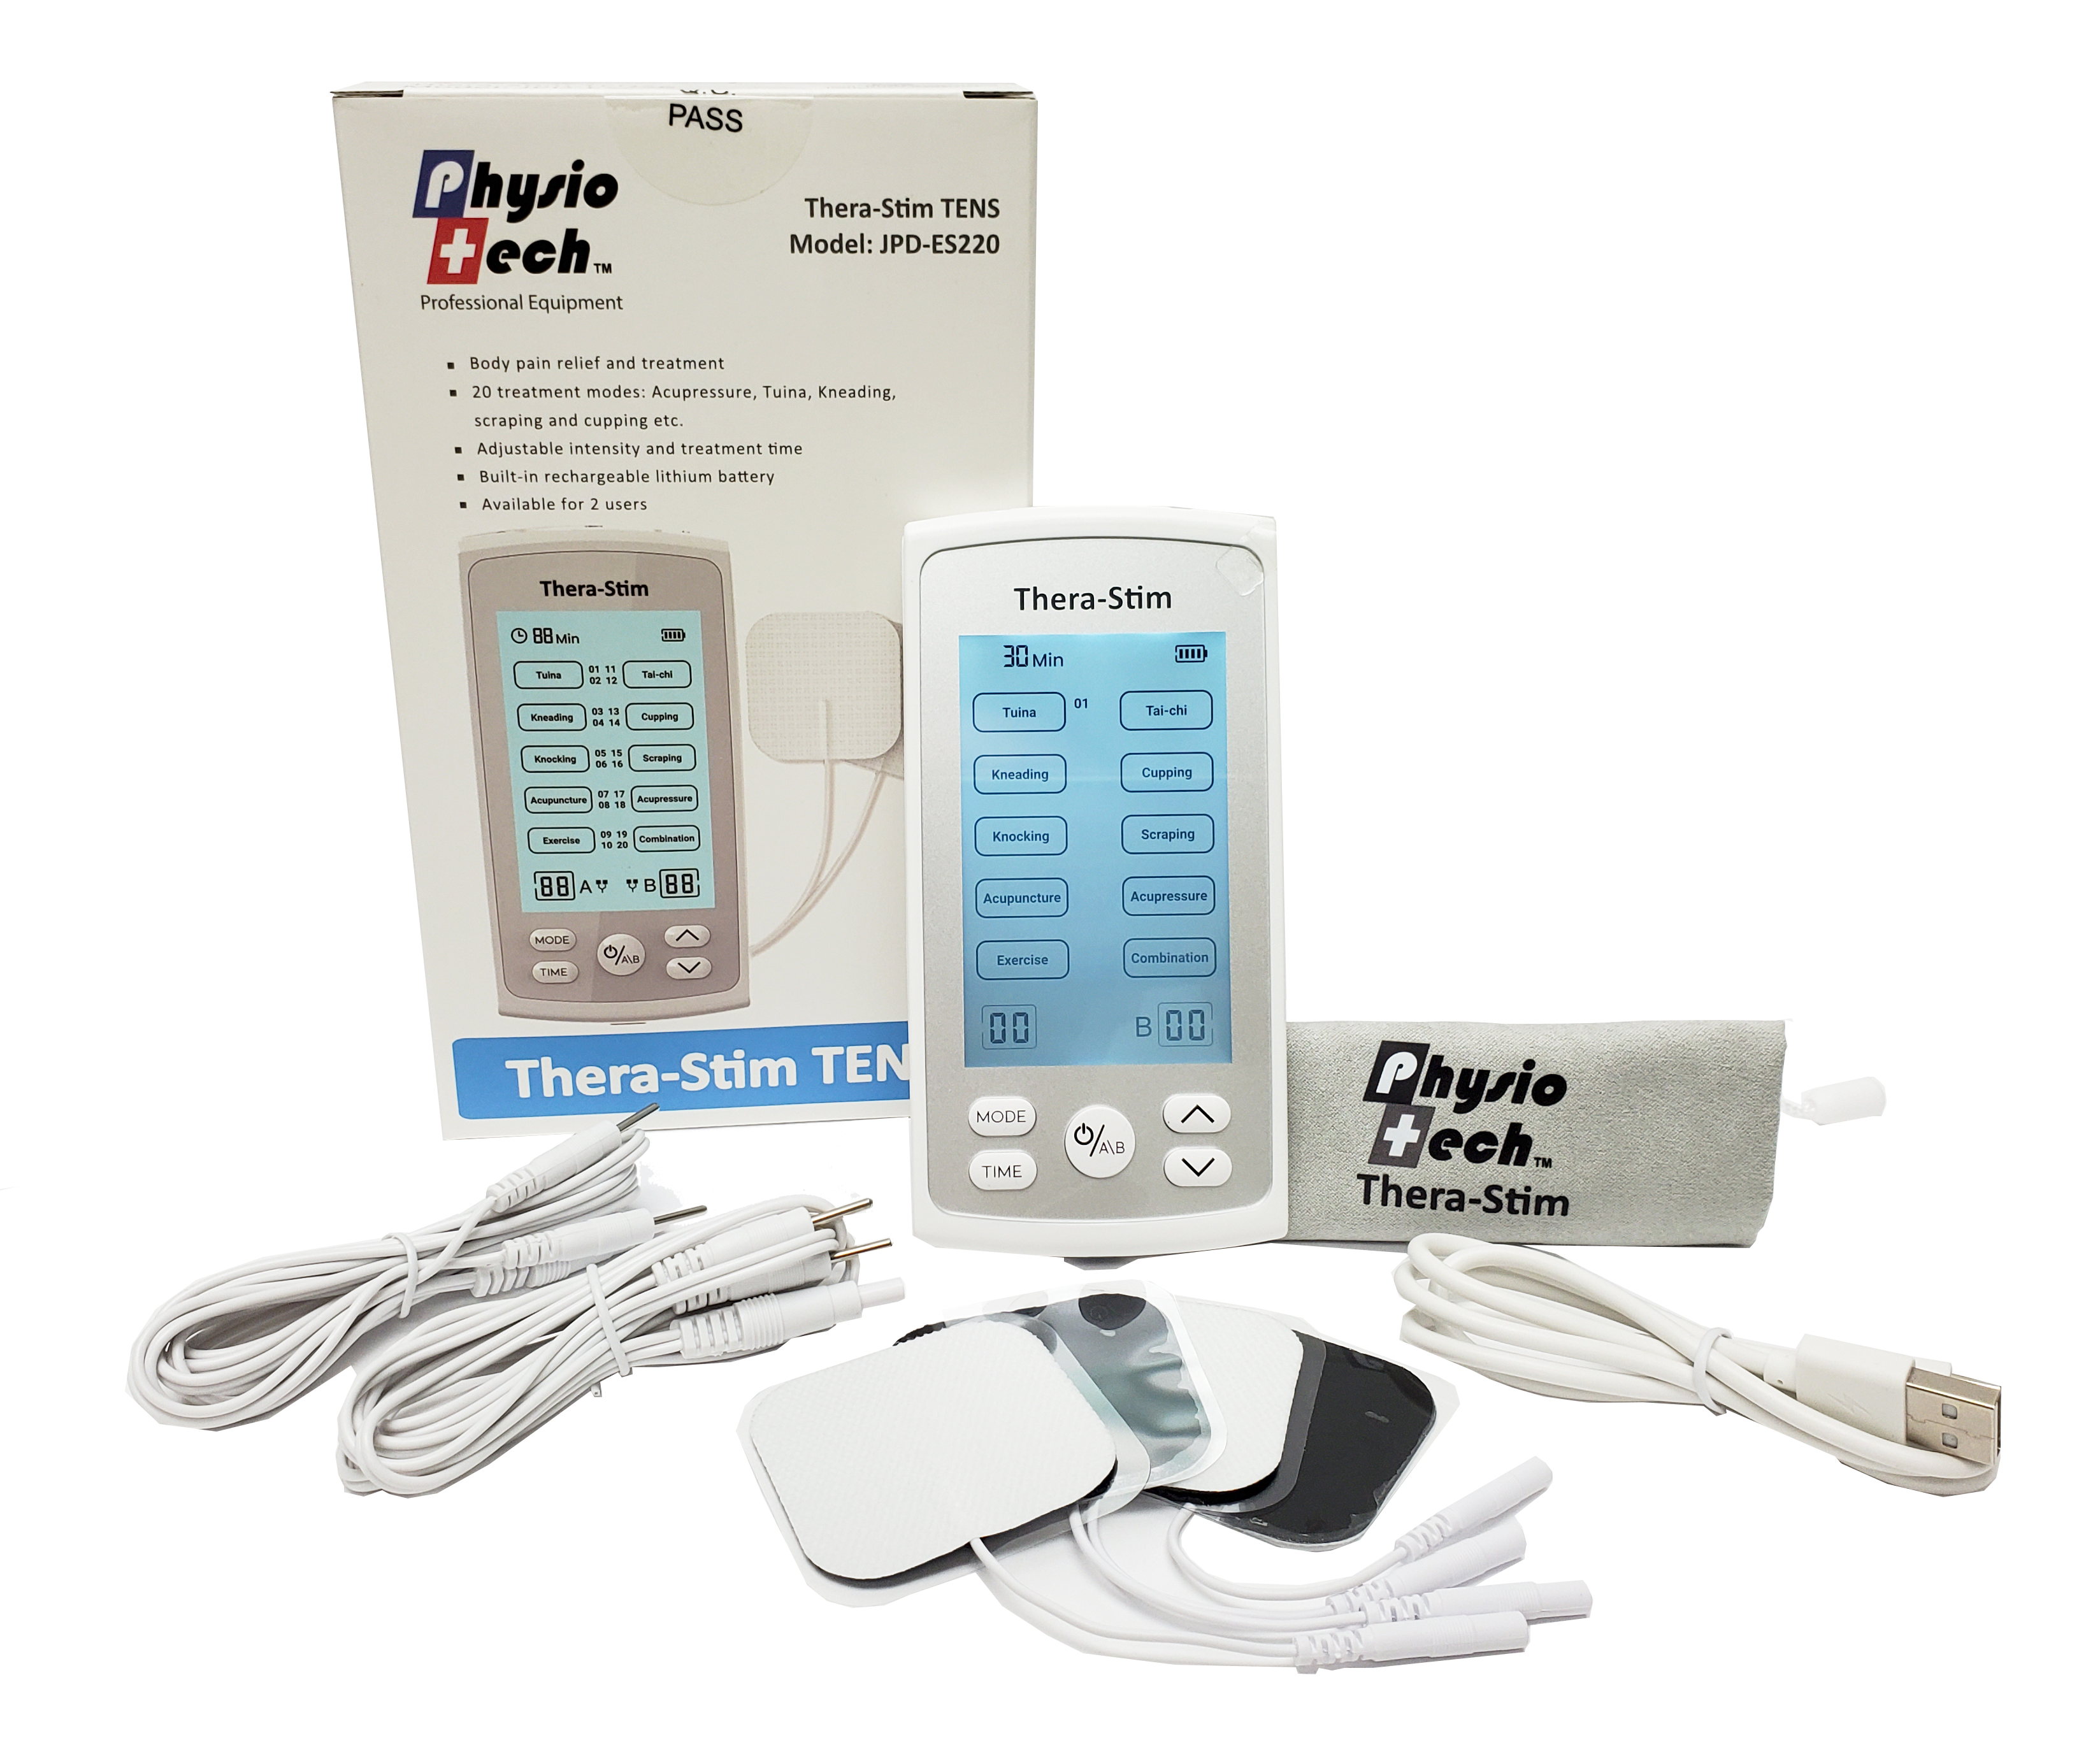 How To Get A TENS Unit Covered By Insurance